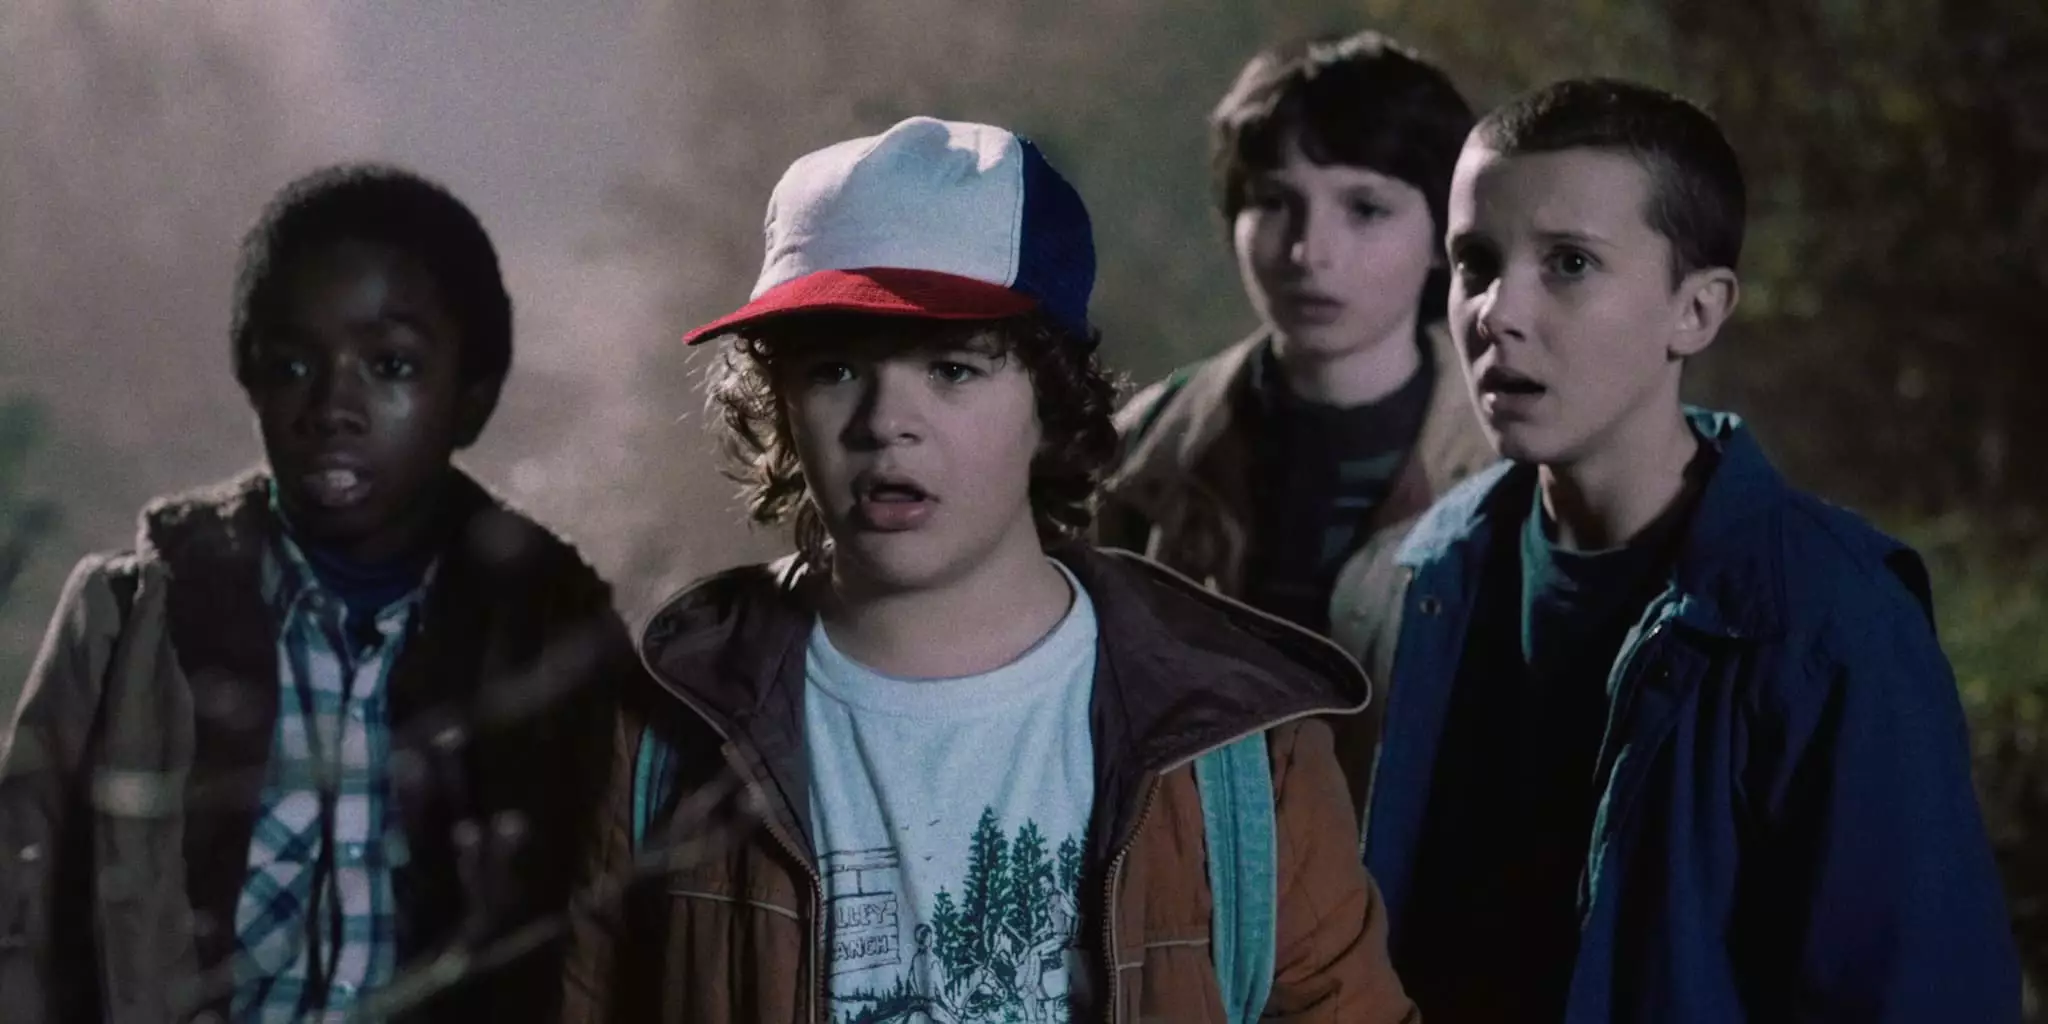 The Real Life Events Behind Stranger Things Are As Weird As The Show